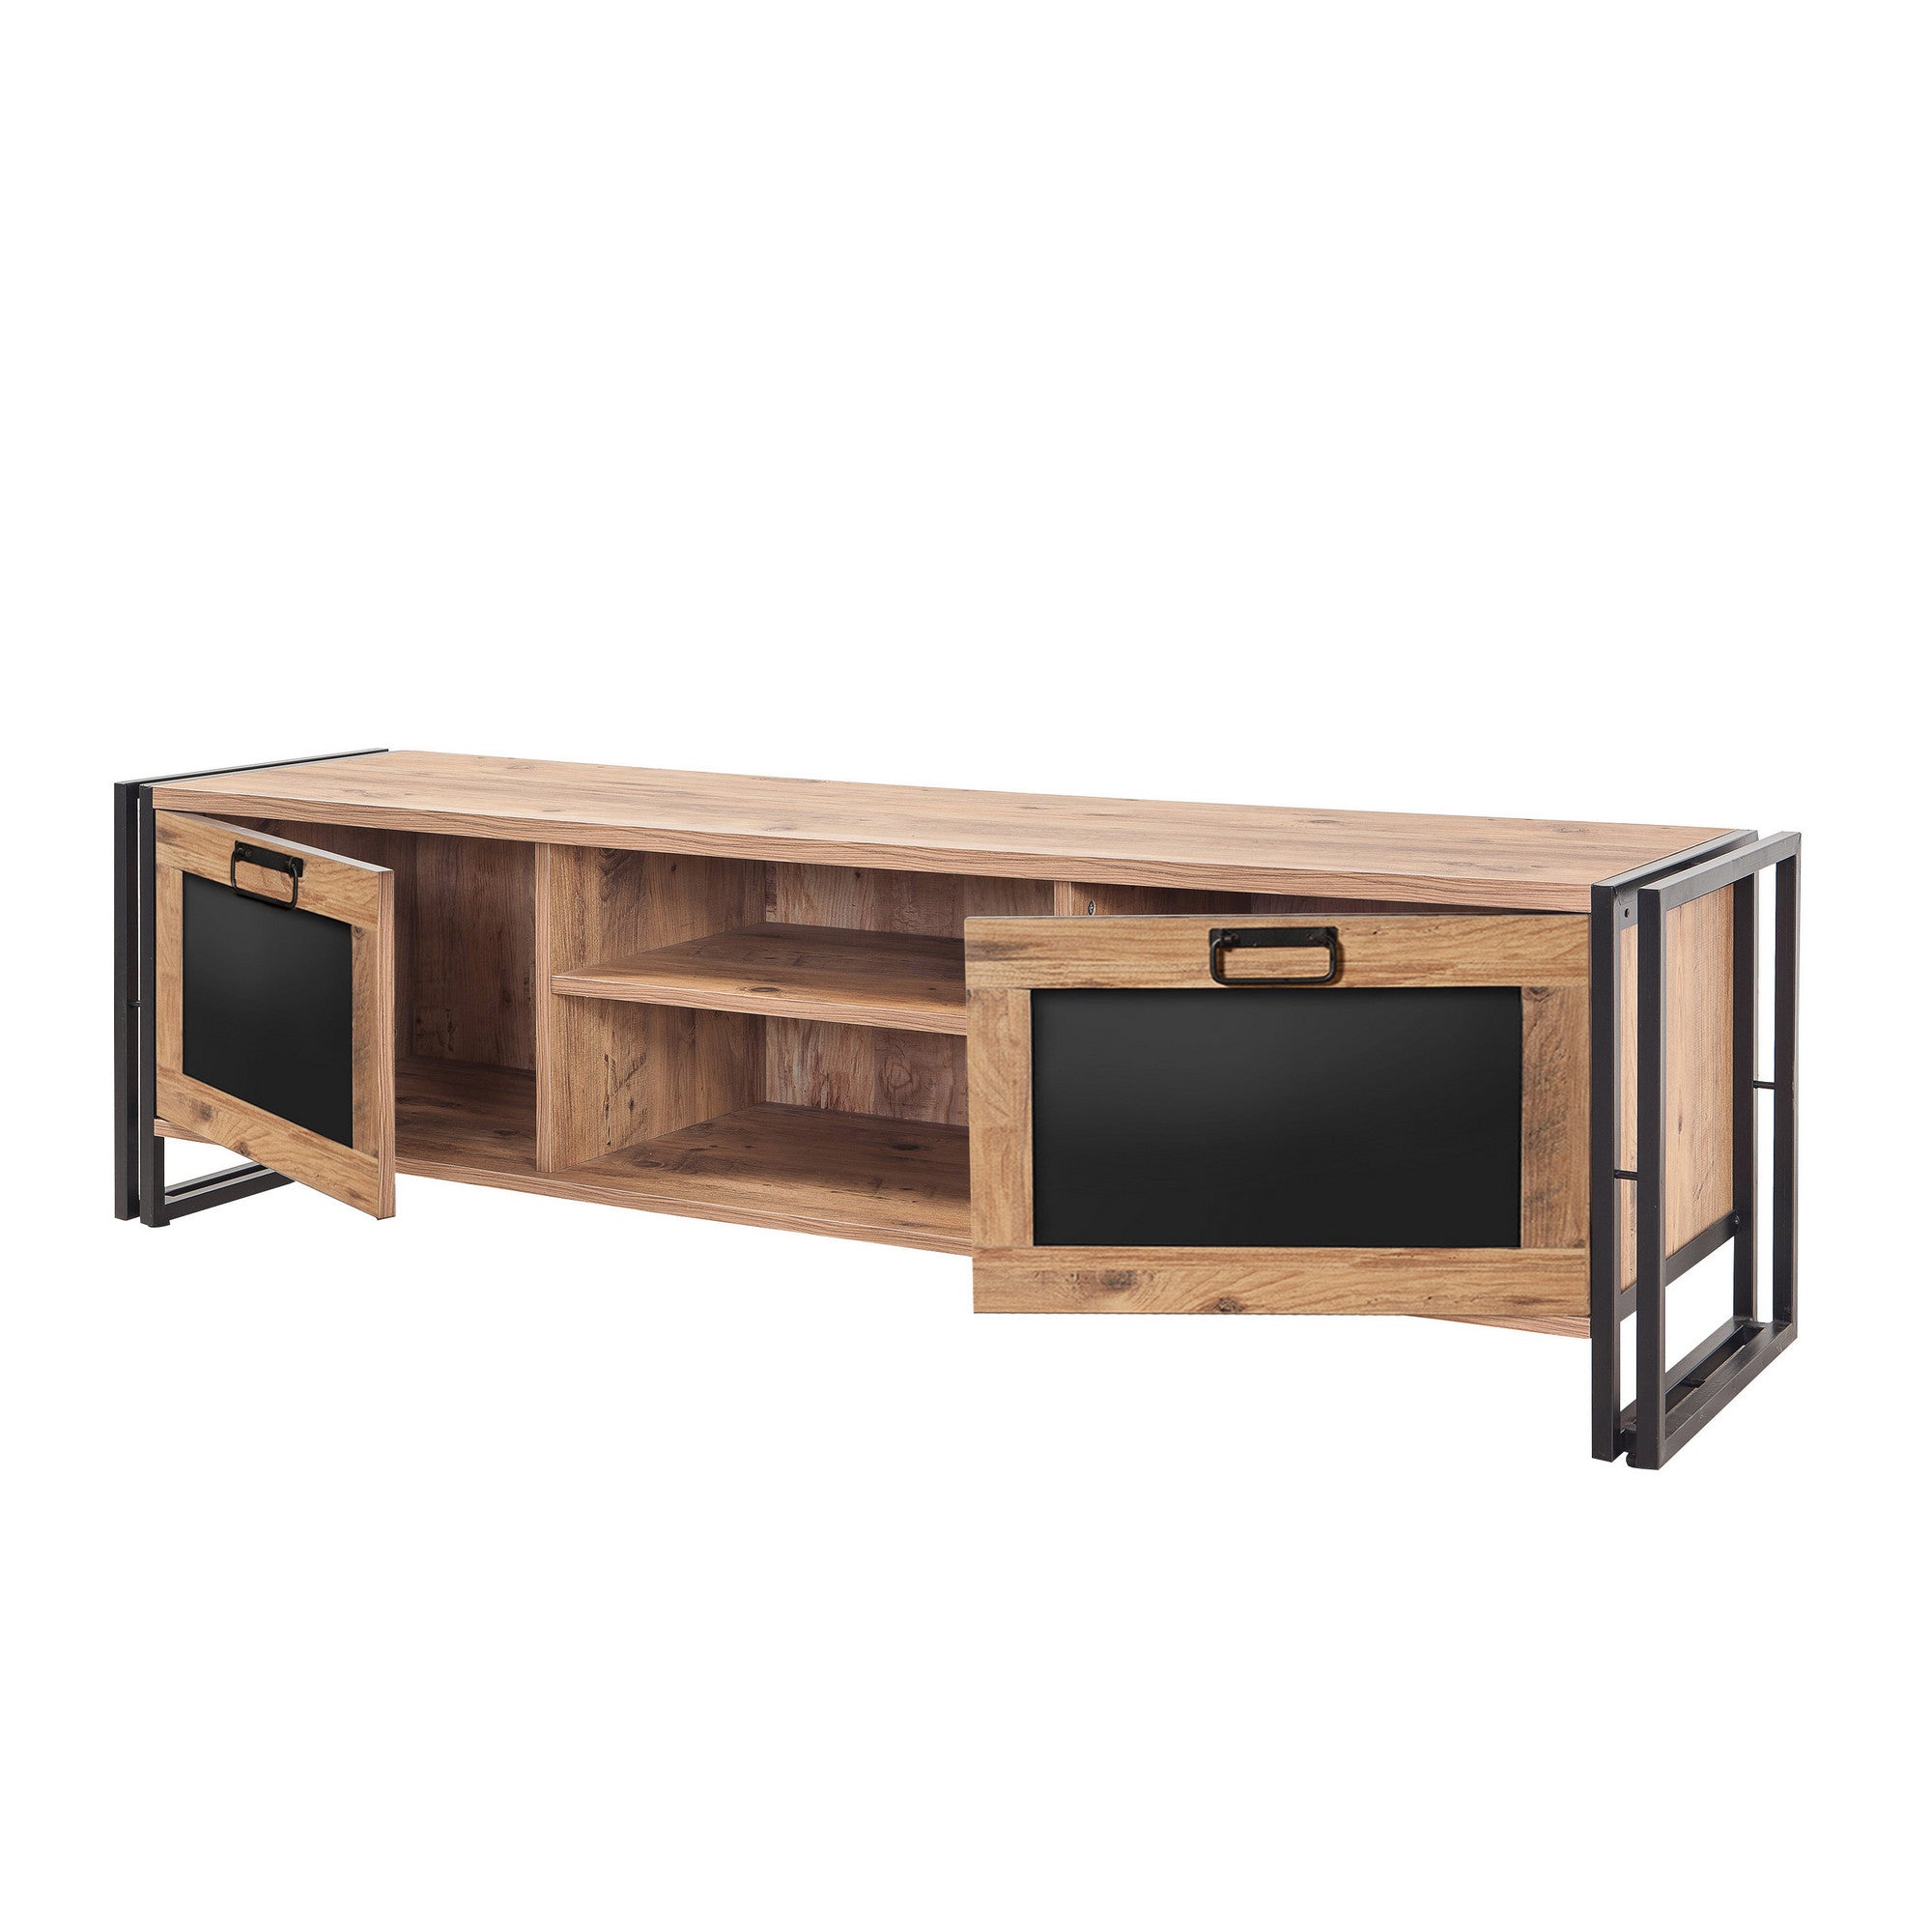 TV Stand Arcas Norma